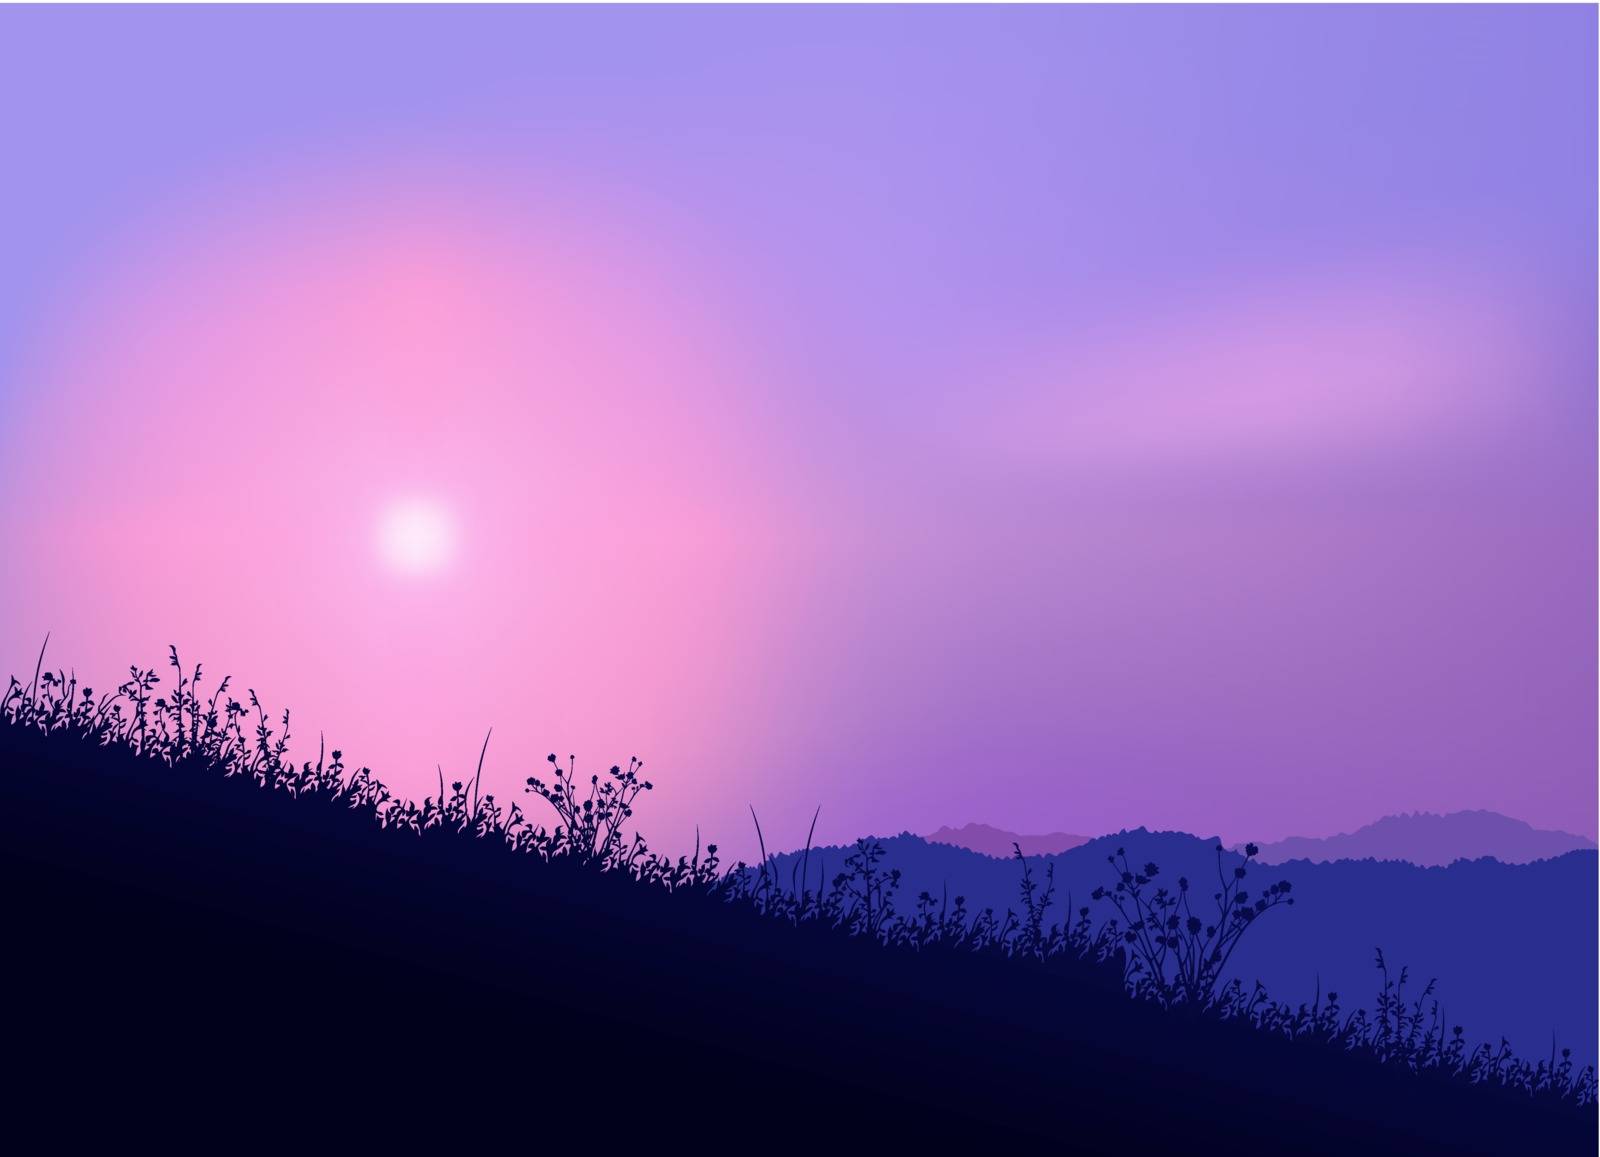 Meadow And Sunrise - Colored Background Illustration, Vector